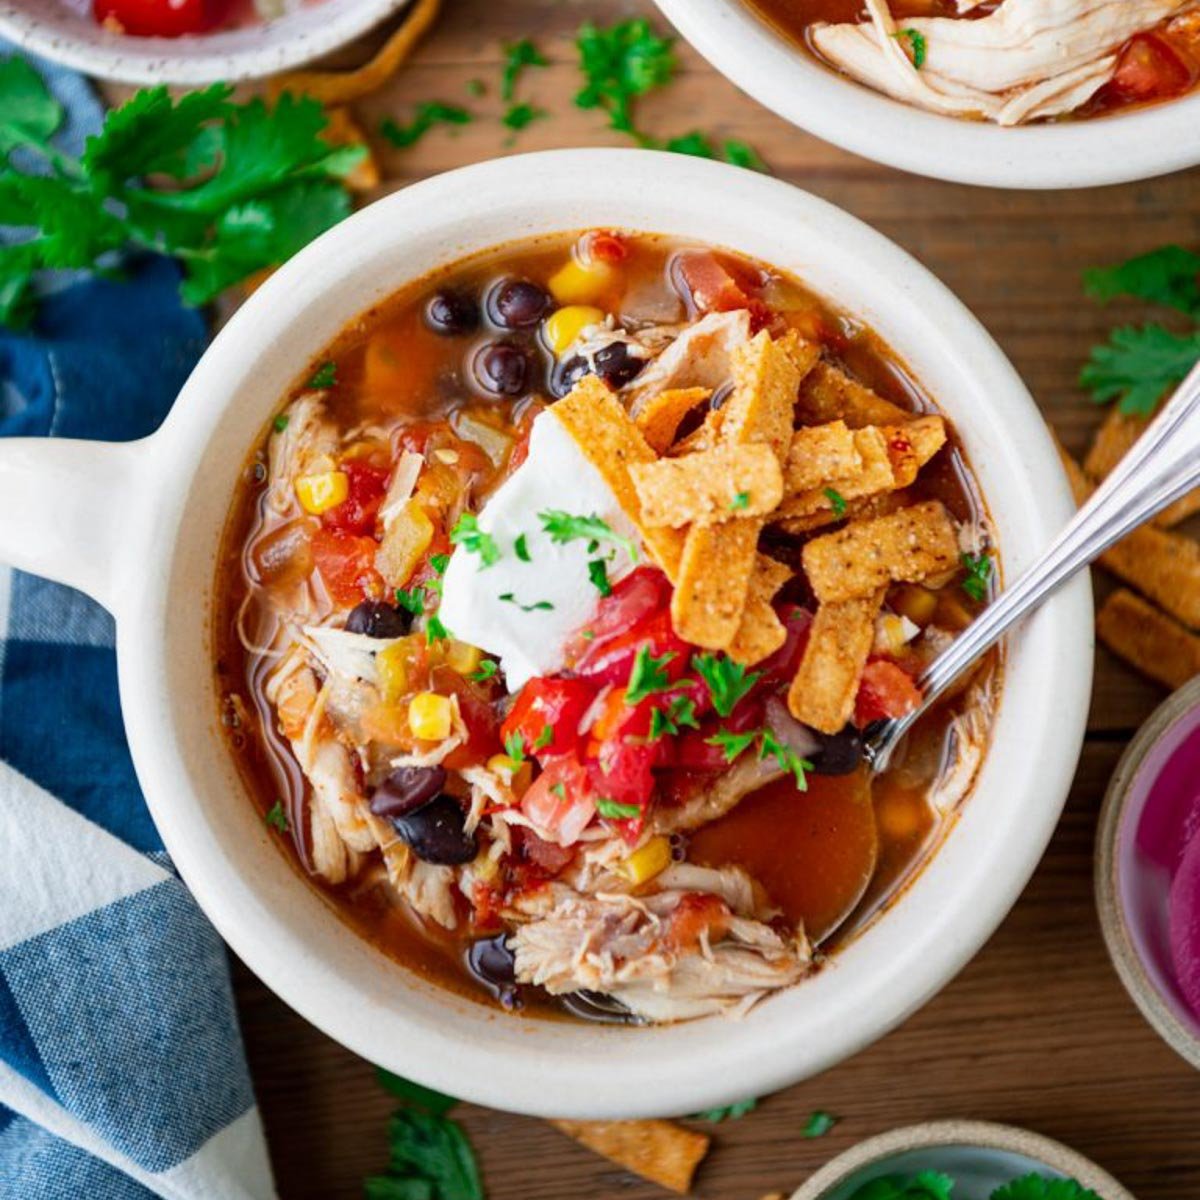 Easy Chicken Tortilla Soup with Rice - My Sequined Life